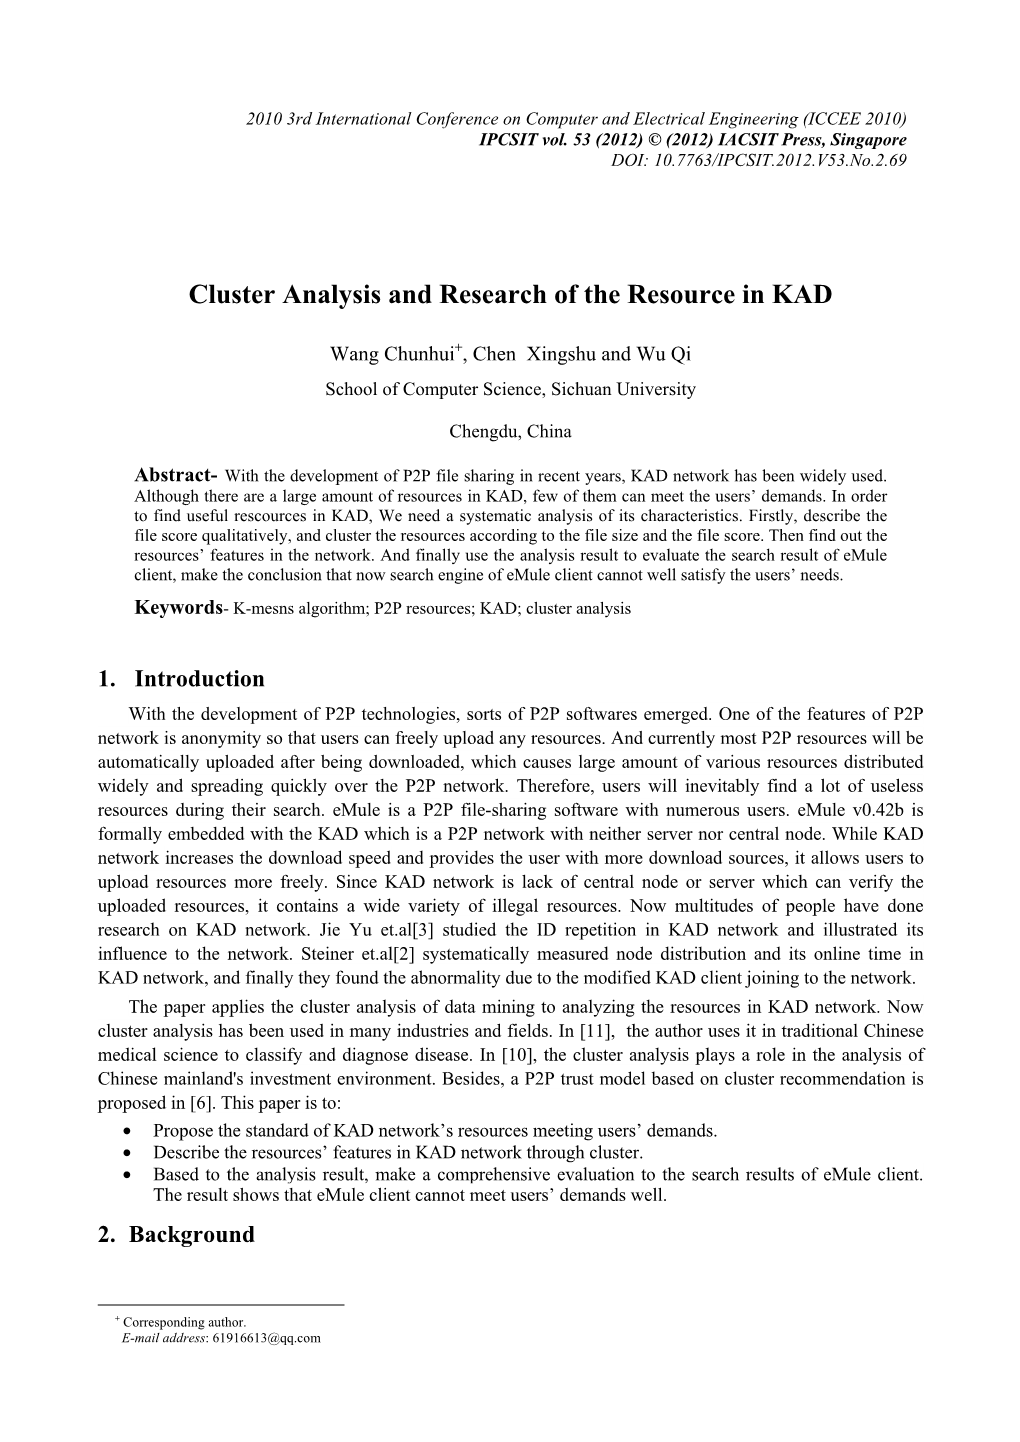 Cluster Analysis and Research of the Resource in KAD